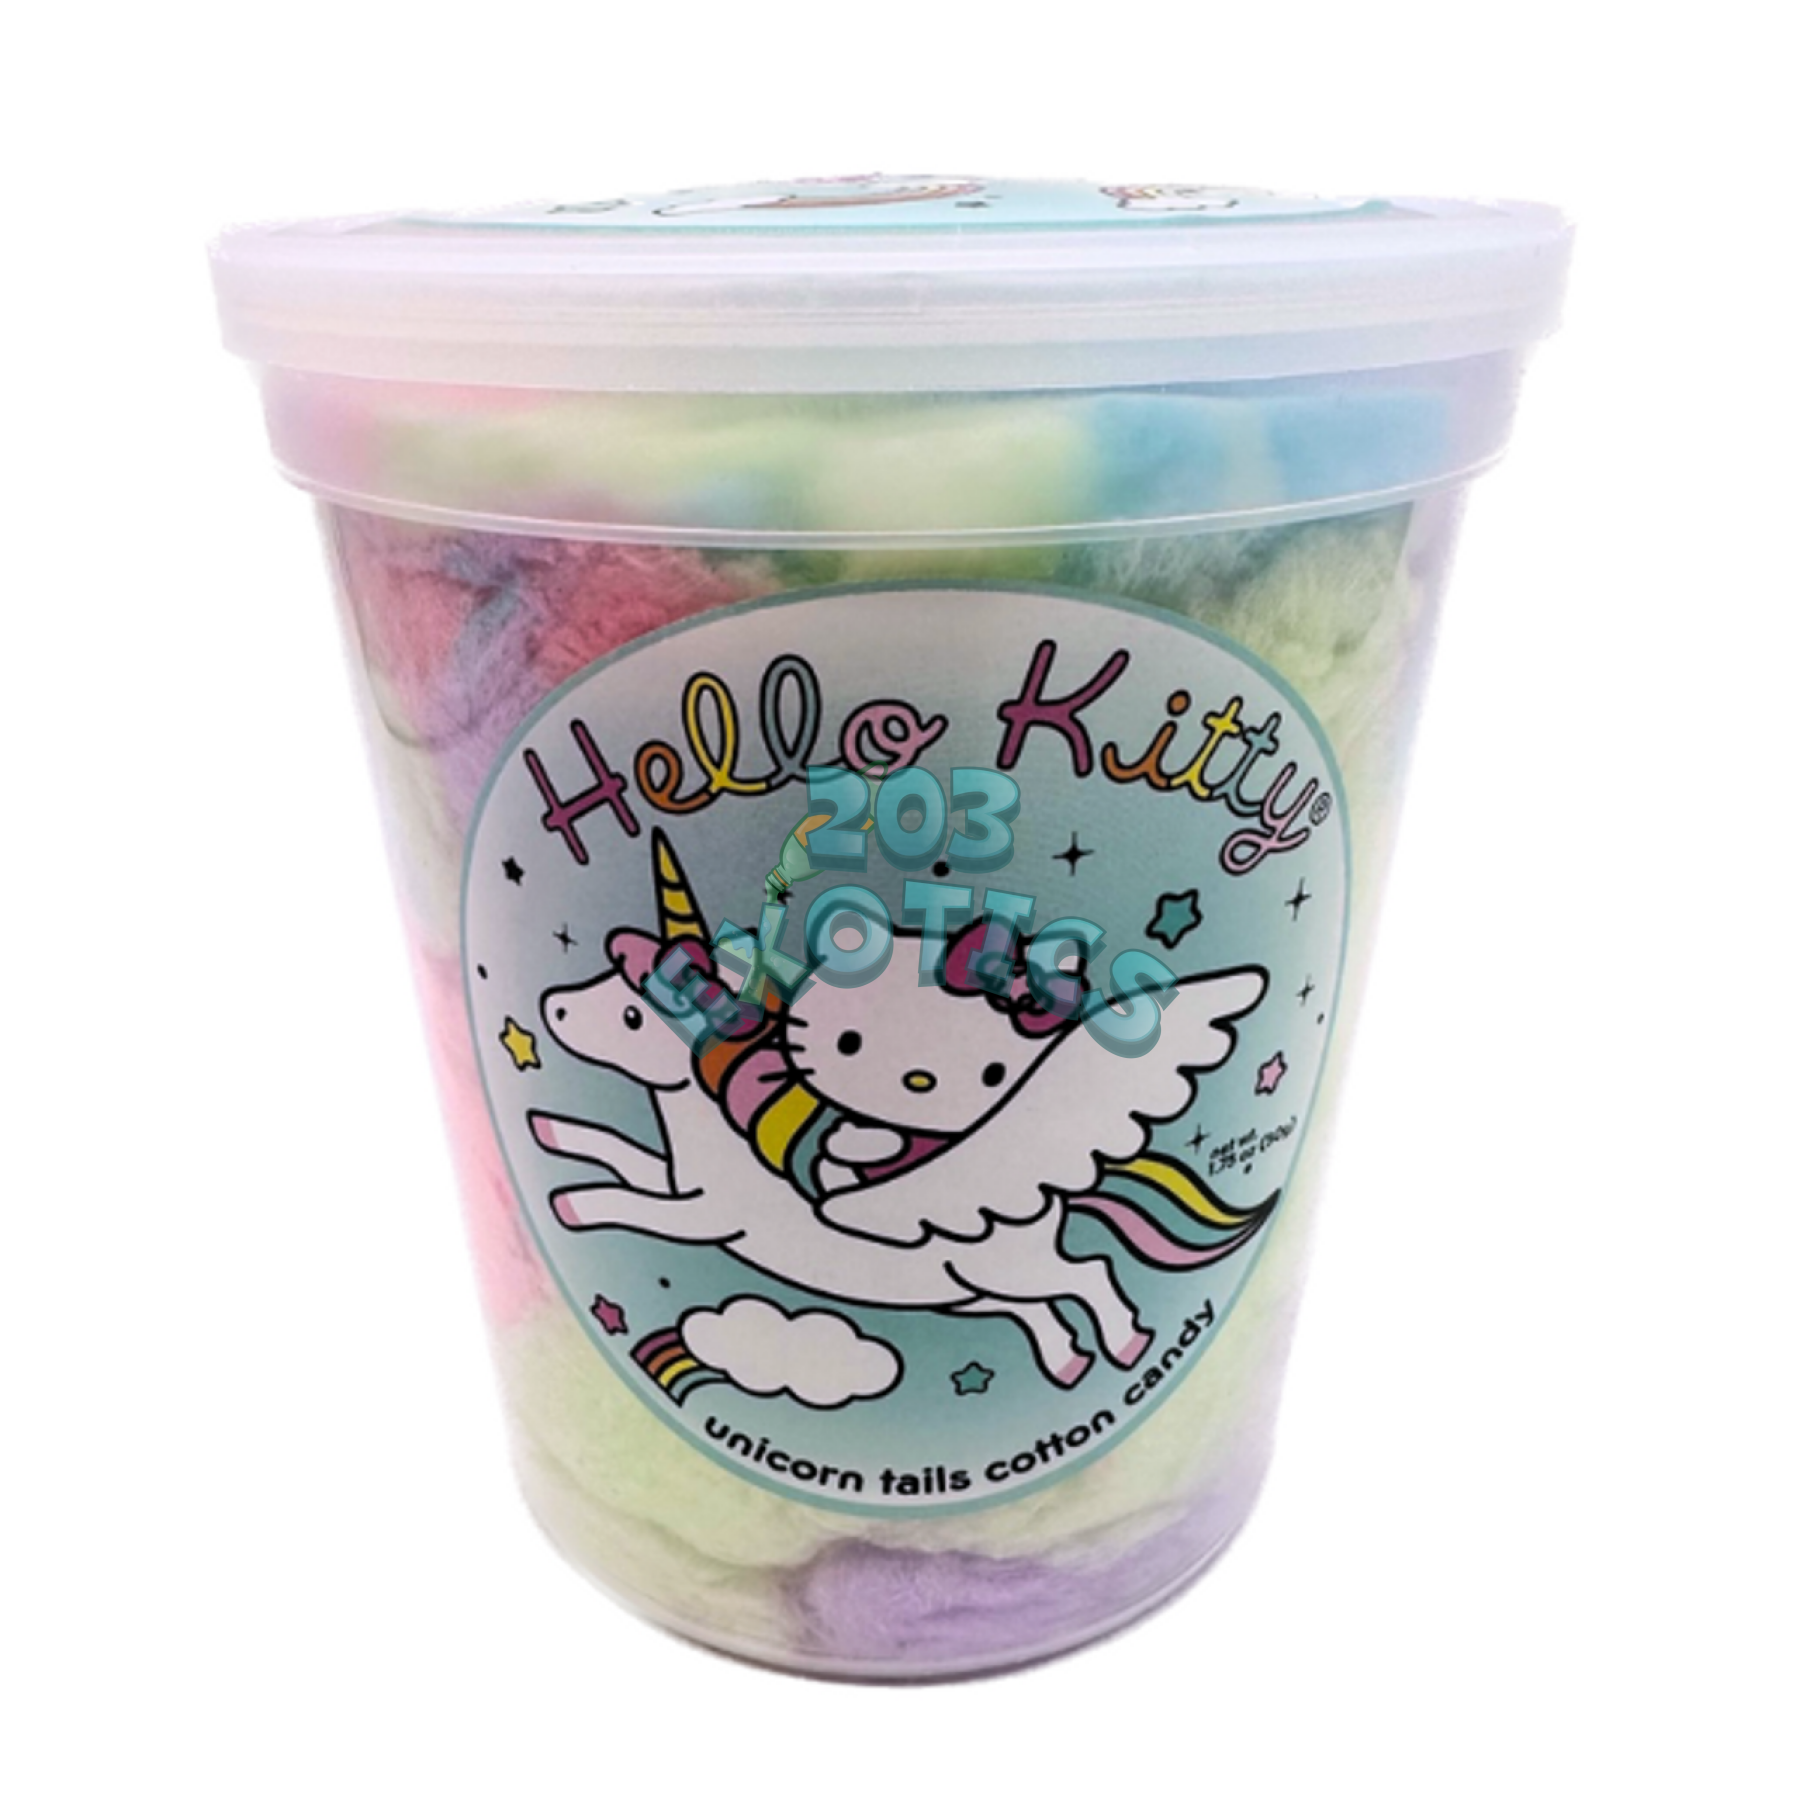 Hello Kitty Unicorn Tails Cotton Candy (25G) Sweets